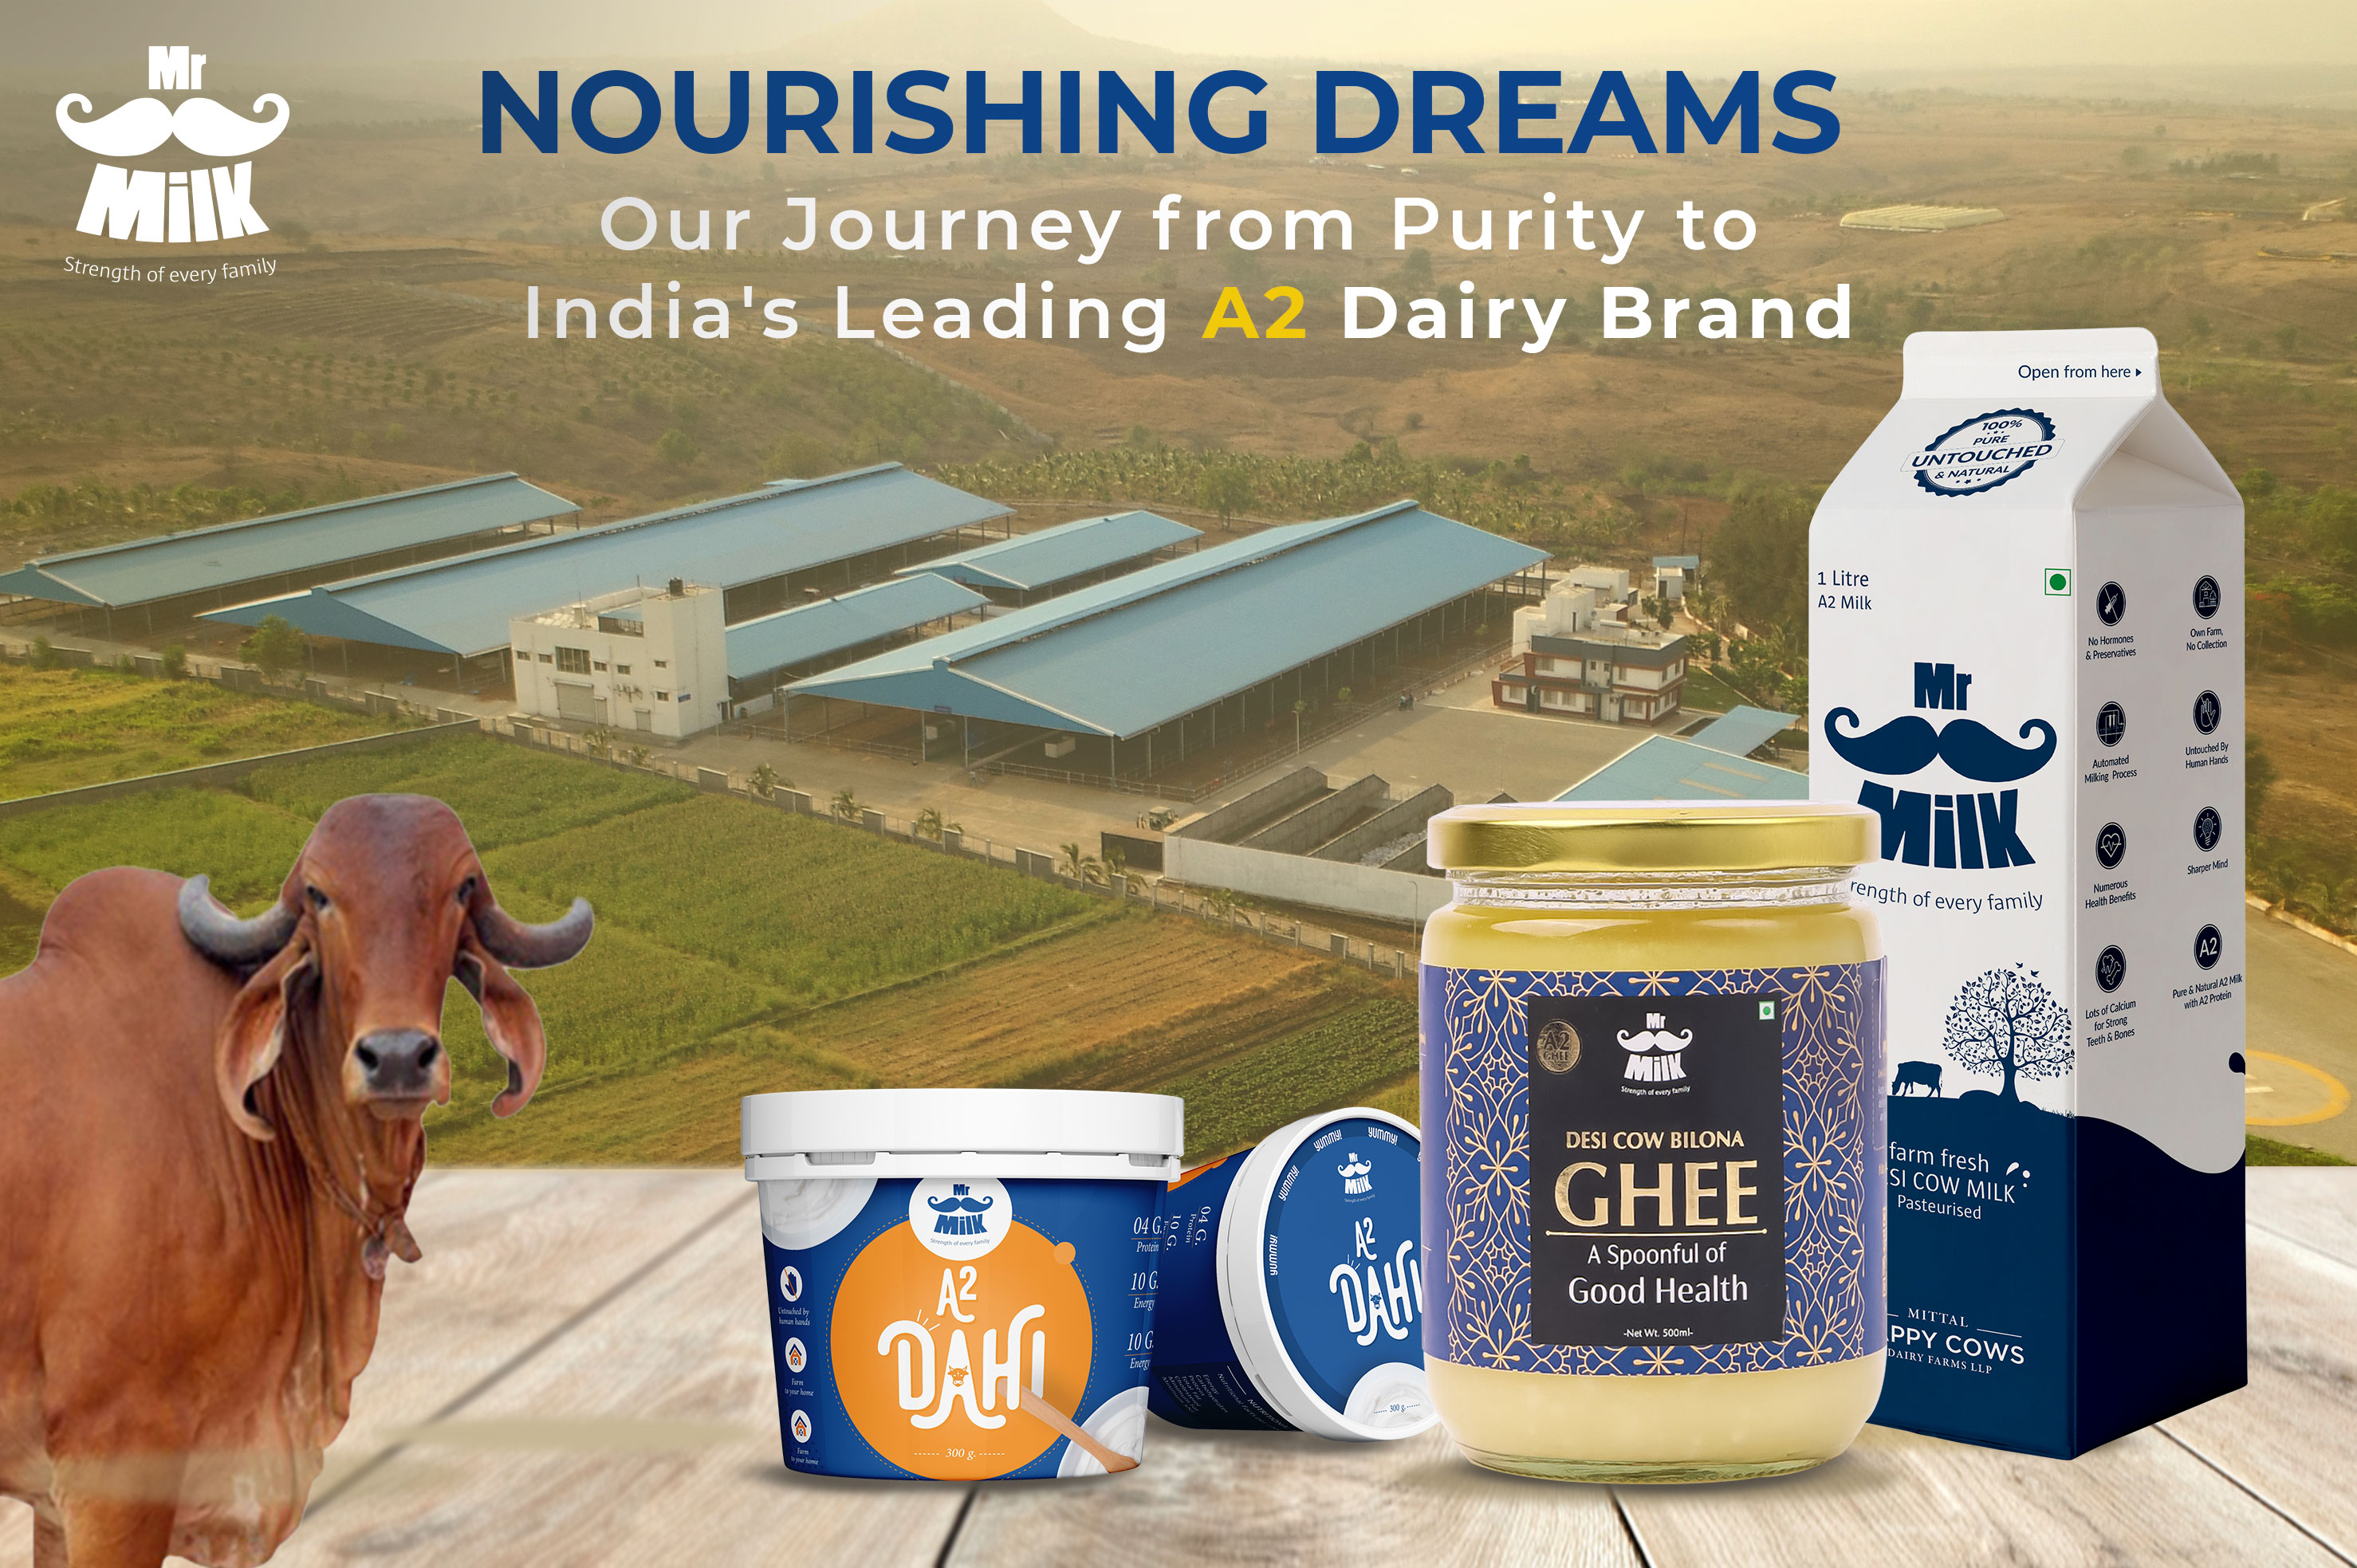 Nourishing Dreams: From Purity to India’s Leading A2 Dairy Brand – The Visionary Journey of Mr. Milk